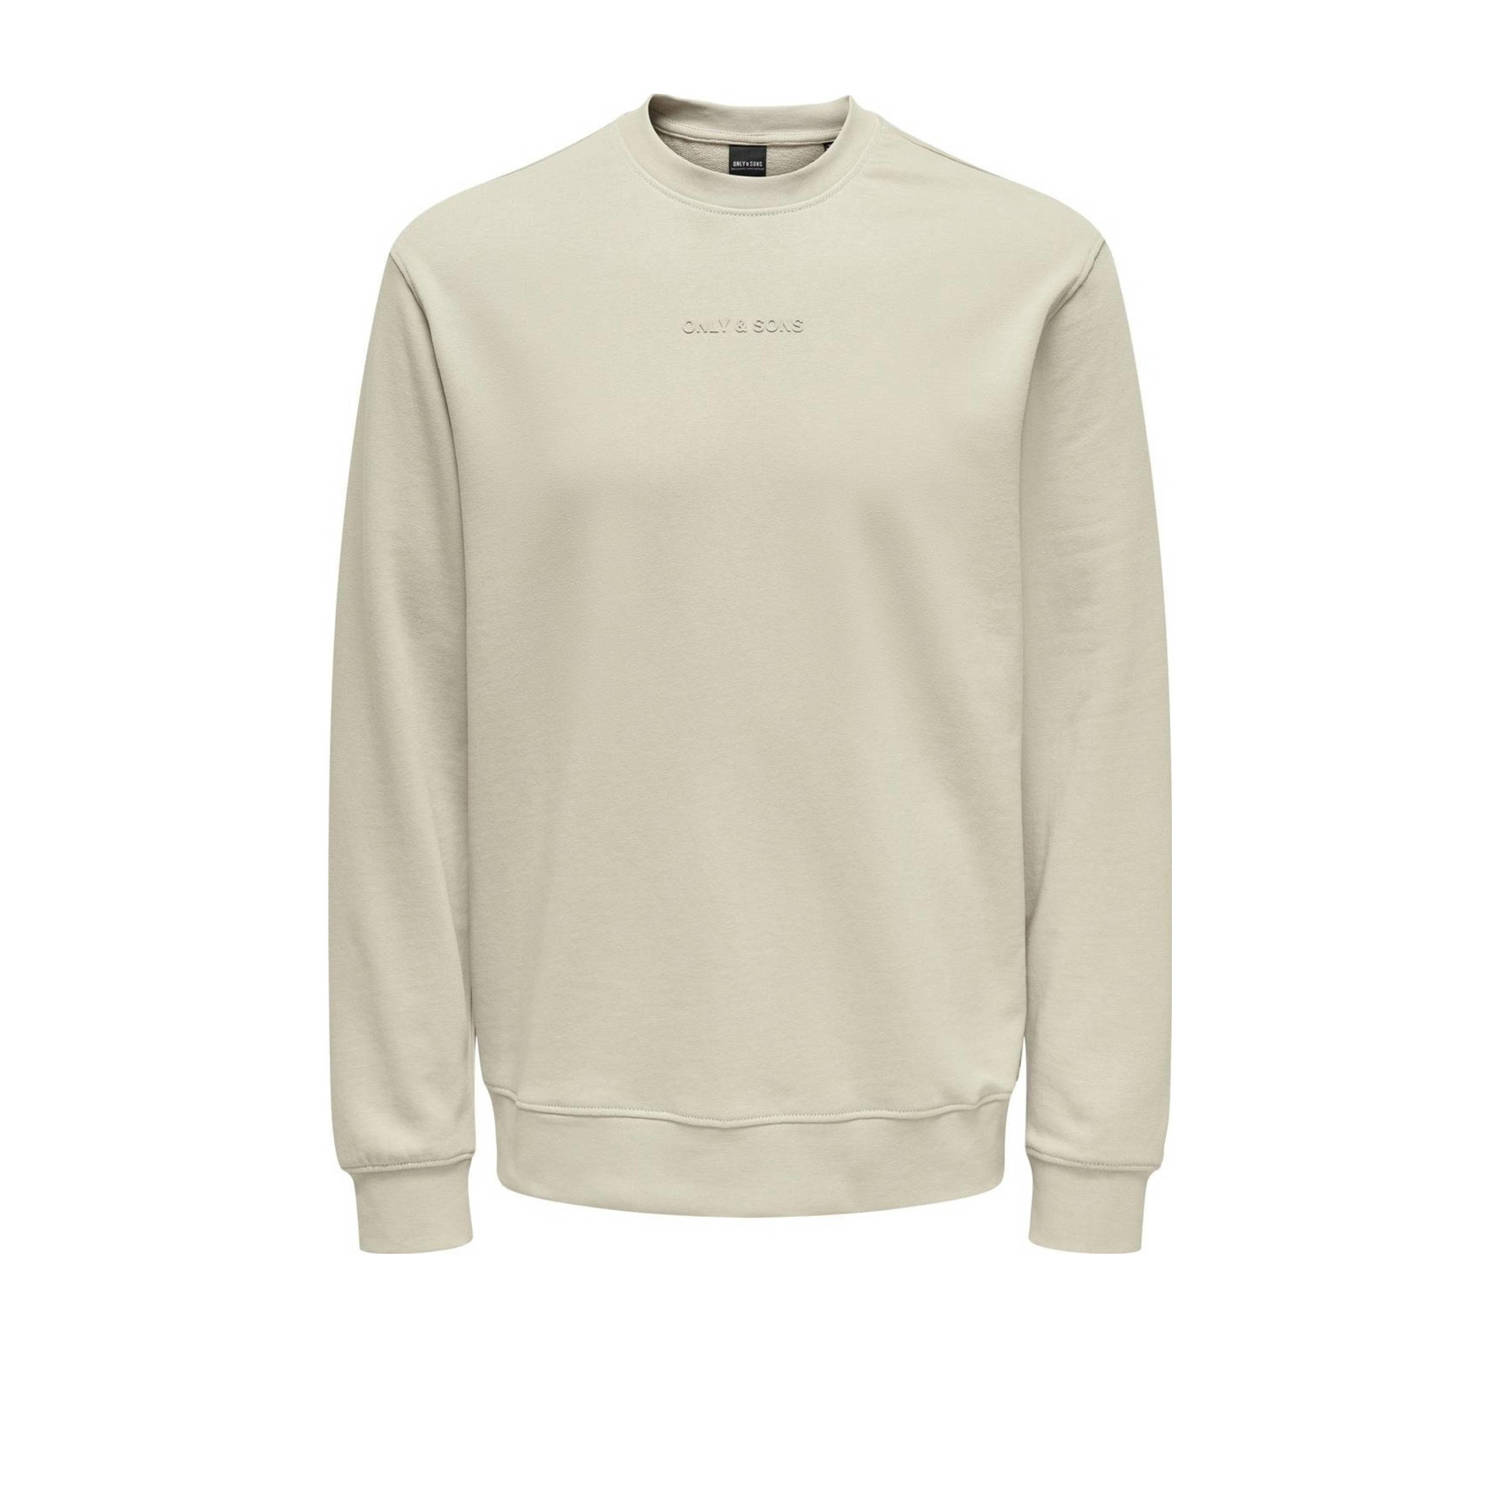 ONLY & SONS sweater met logo silver lining